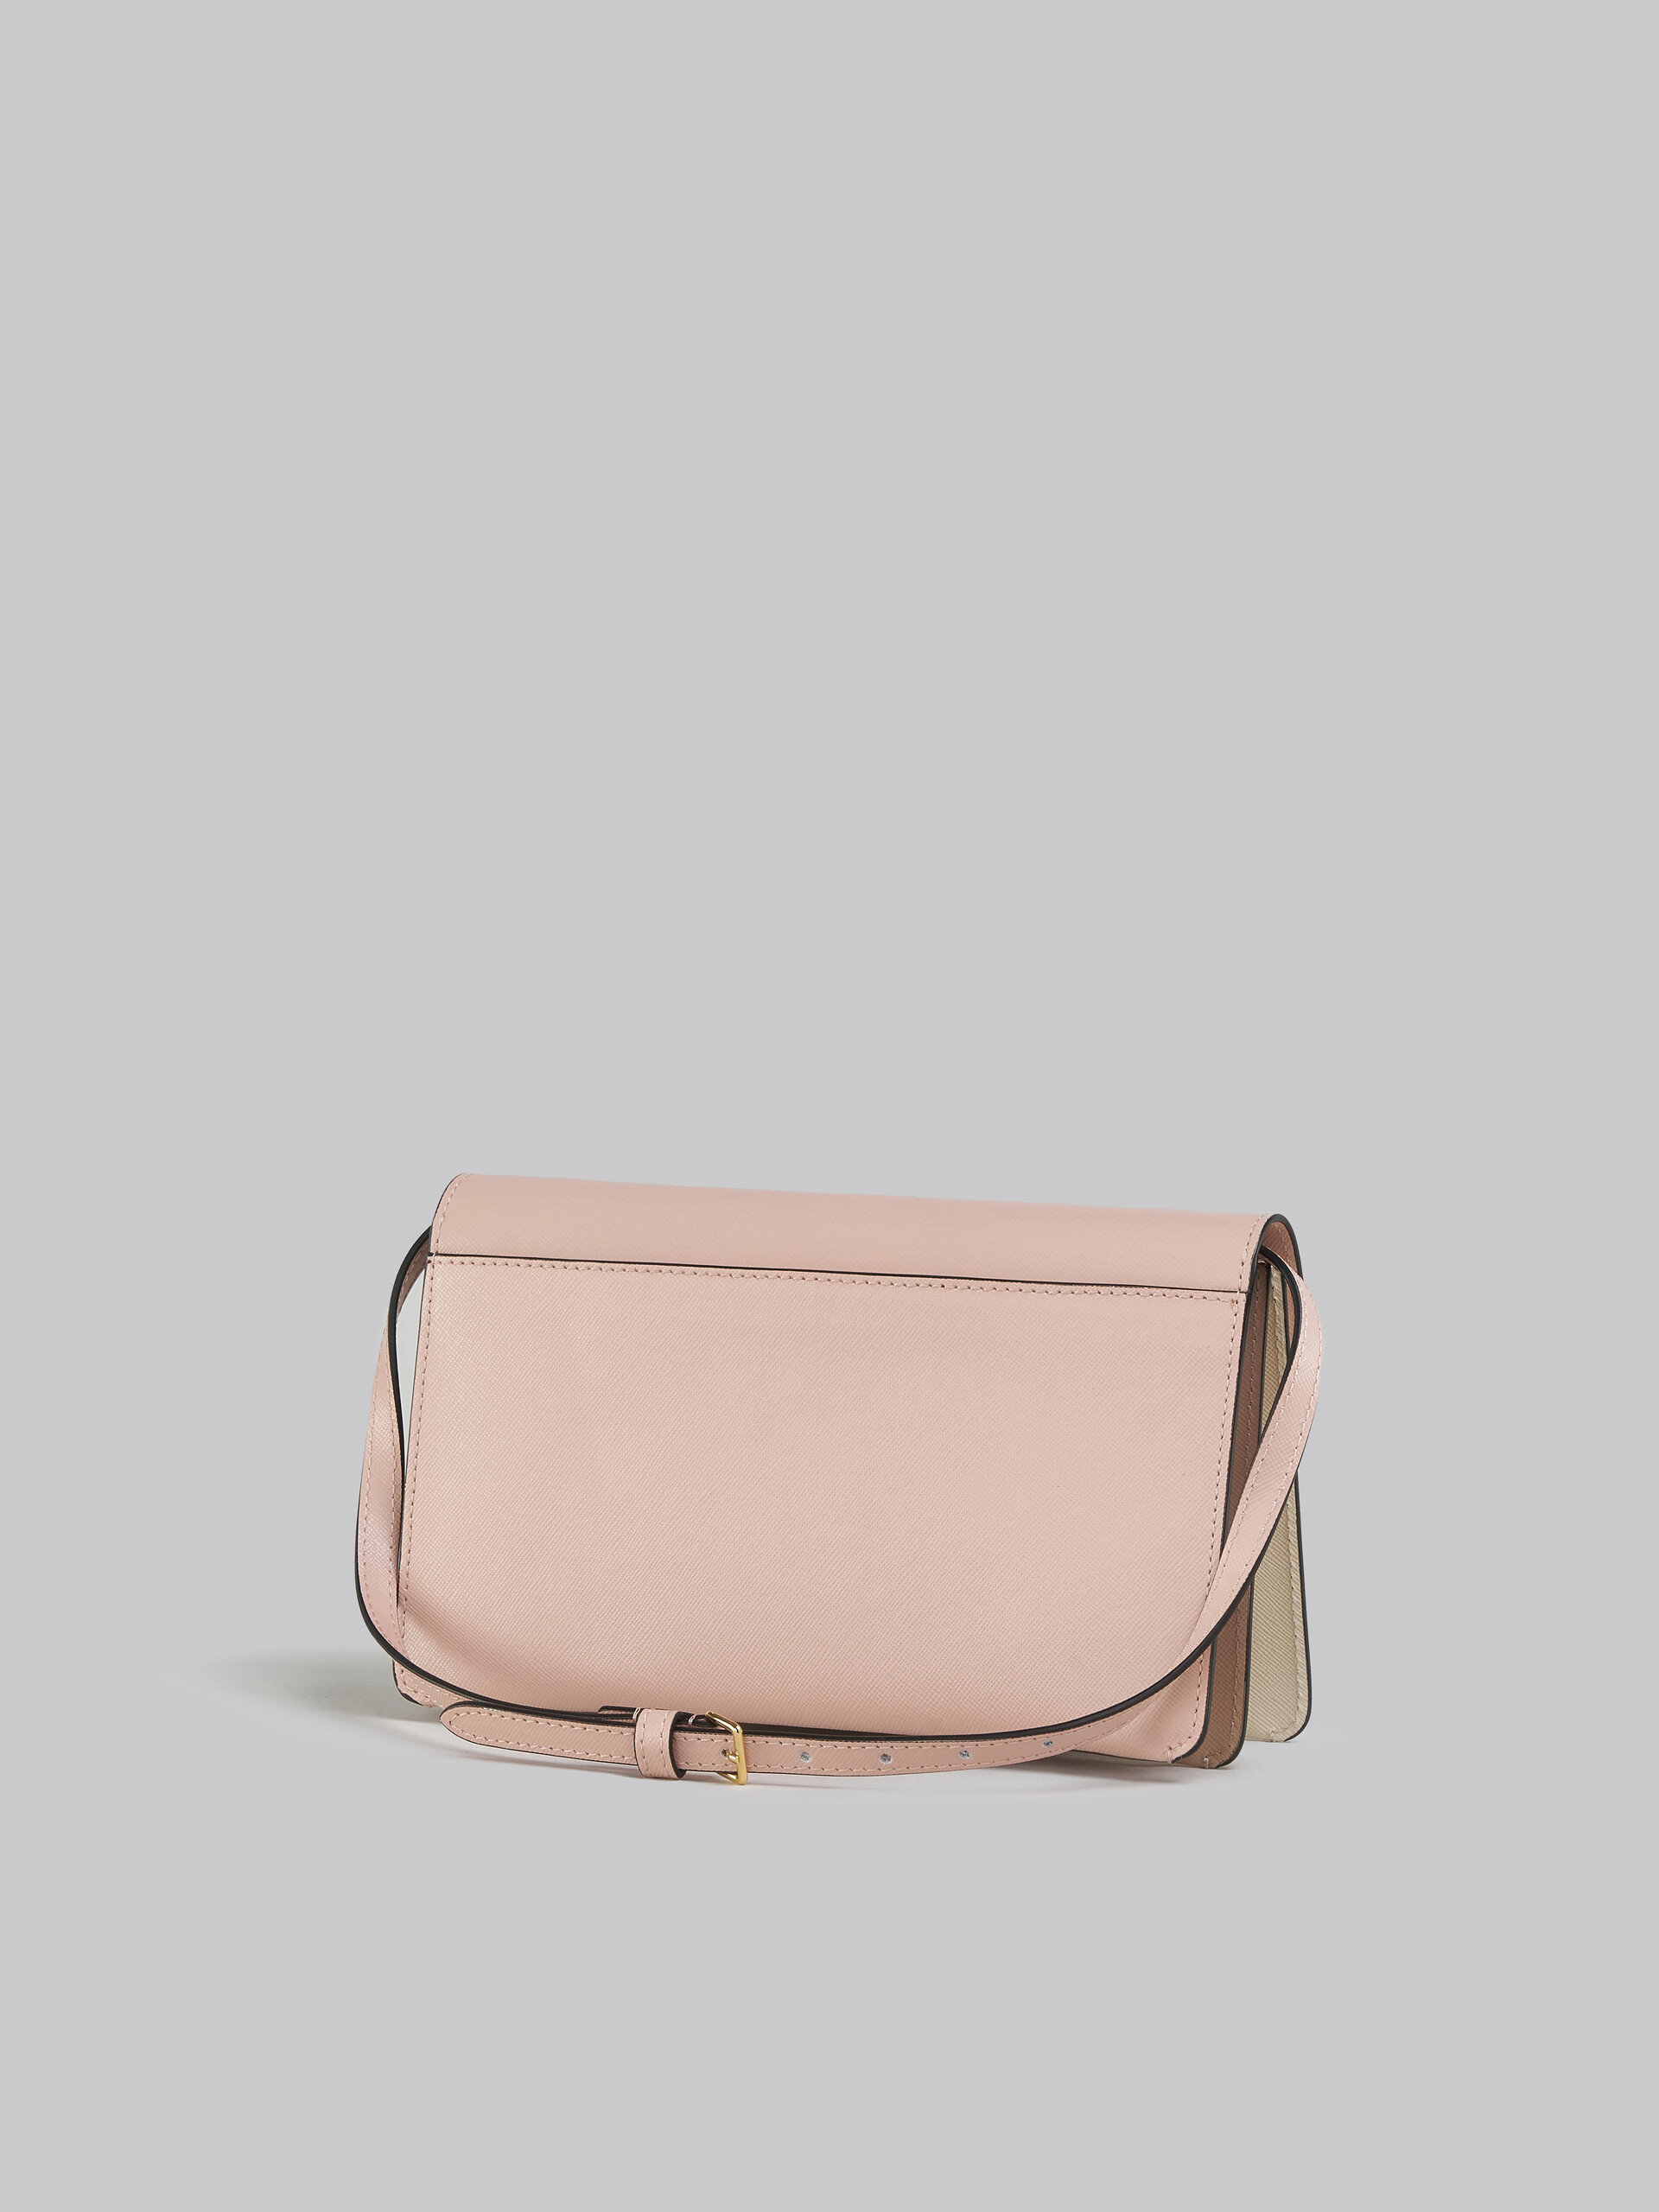 Trunk Clutch in pink white and beige saffiano leather - Pochettes - Image 3